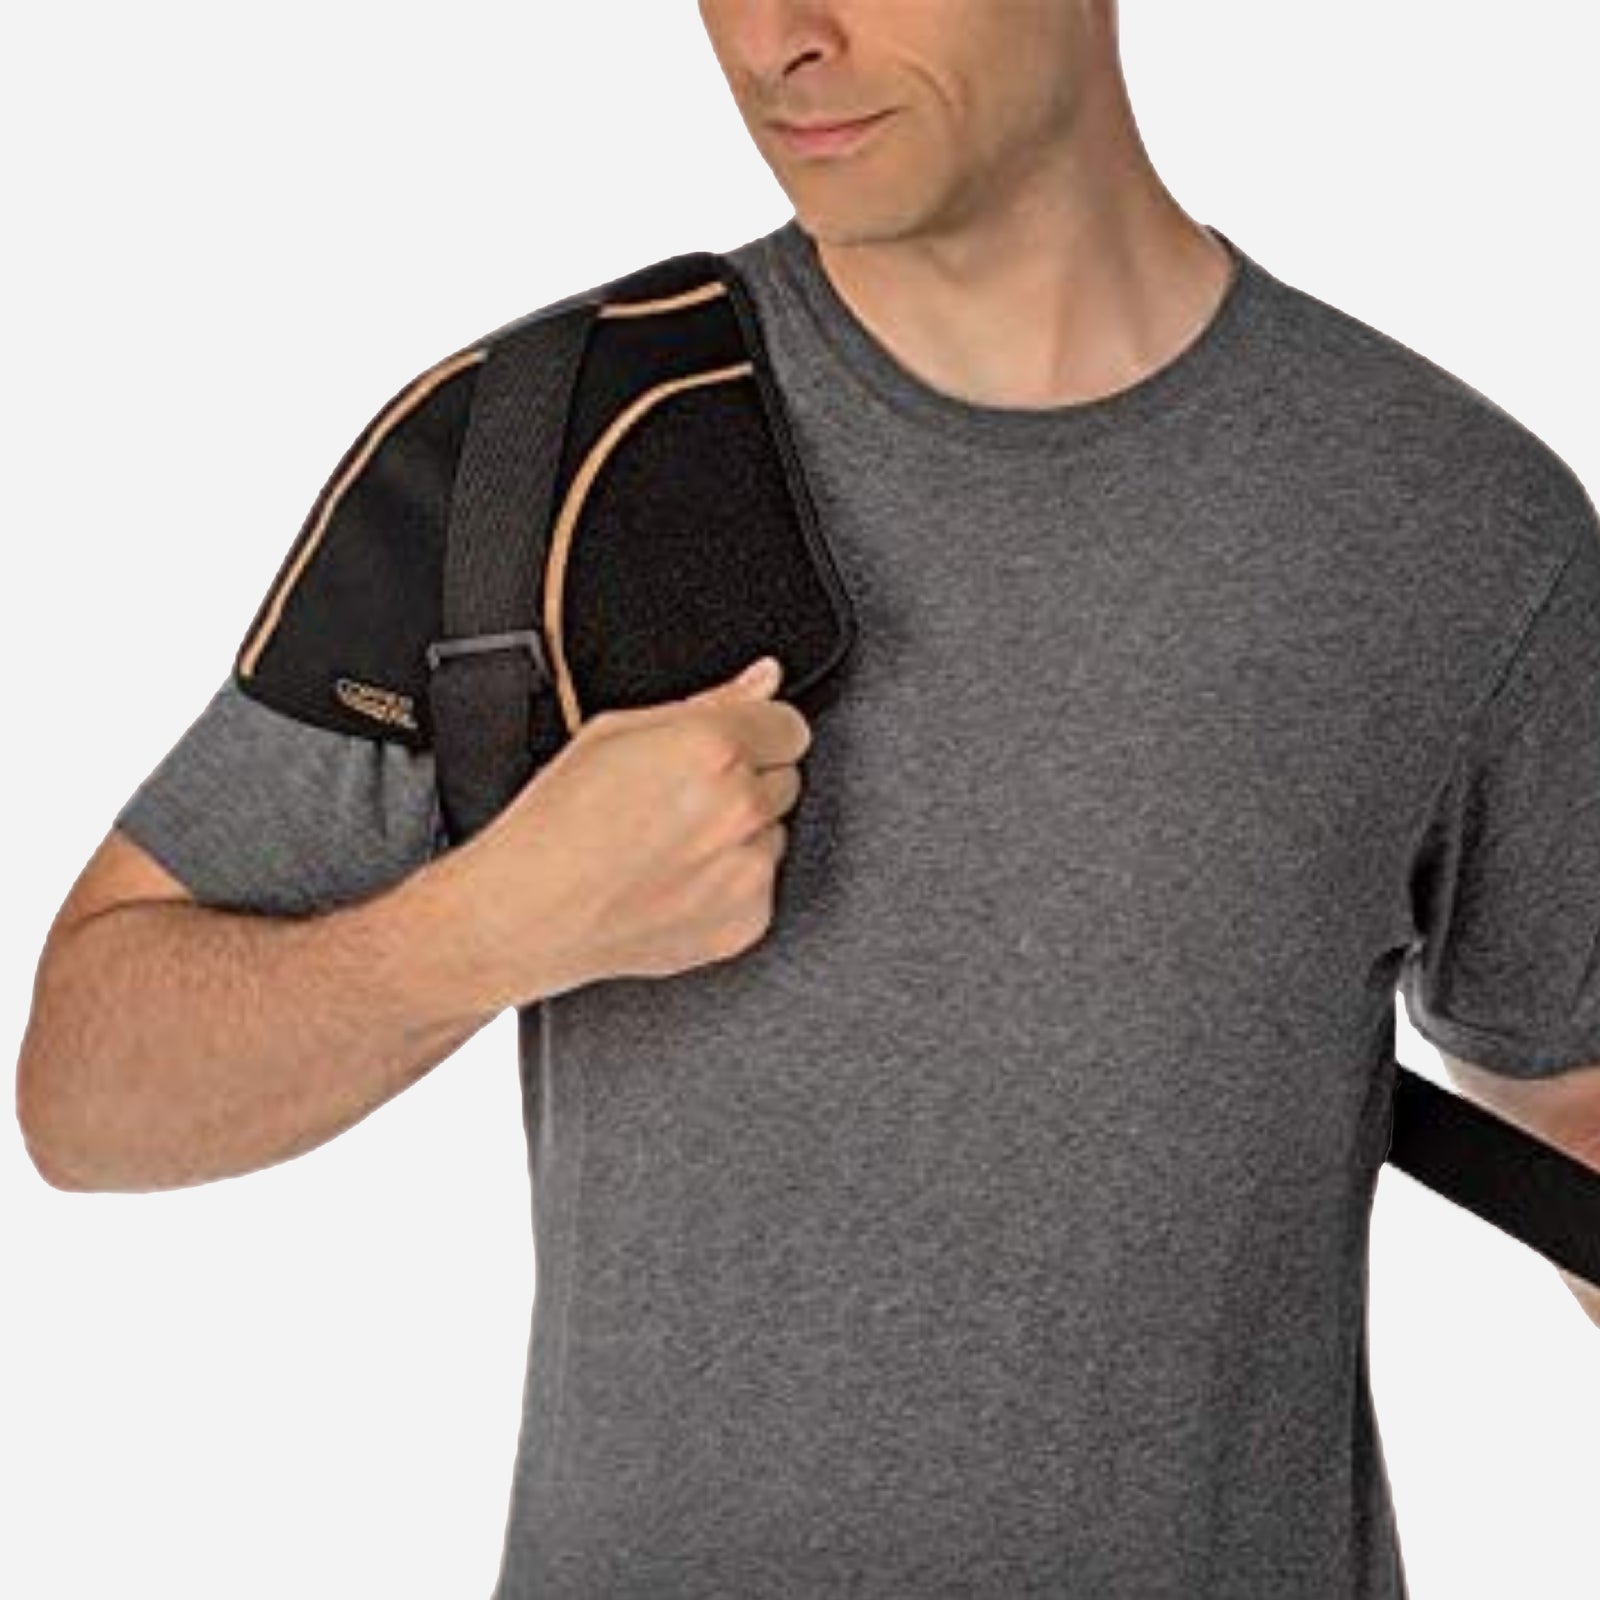 Copper Fit Rapid Relief 3-in1 Back Support Wrap: Hot/Cold Pack 754502041626